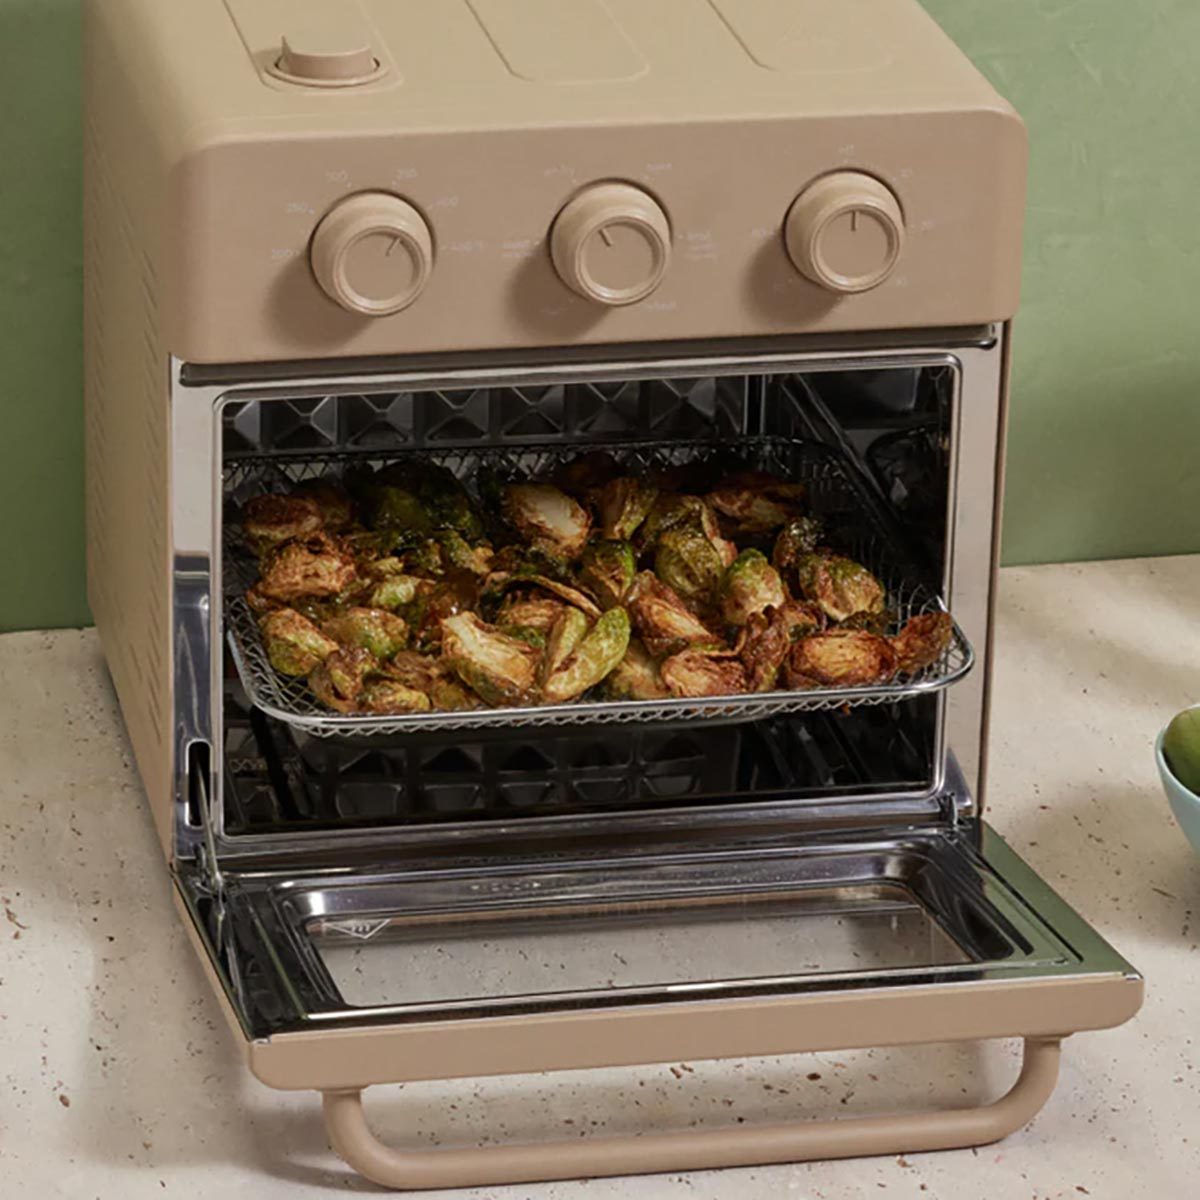 https://www.tasteofhome.com/wp-content/uploads/2023/06/The-Makers-of-the-Always-Pan-Launch-a-6-in-1-Air-Fryer-Oven_FT_via-fromourplace.com_1.jpg